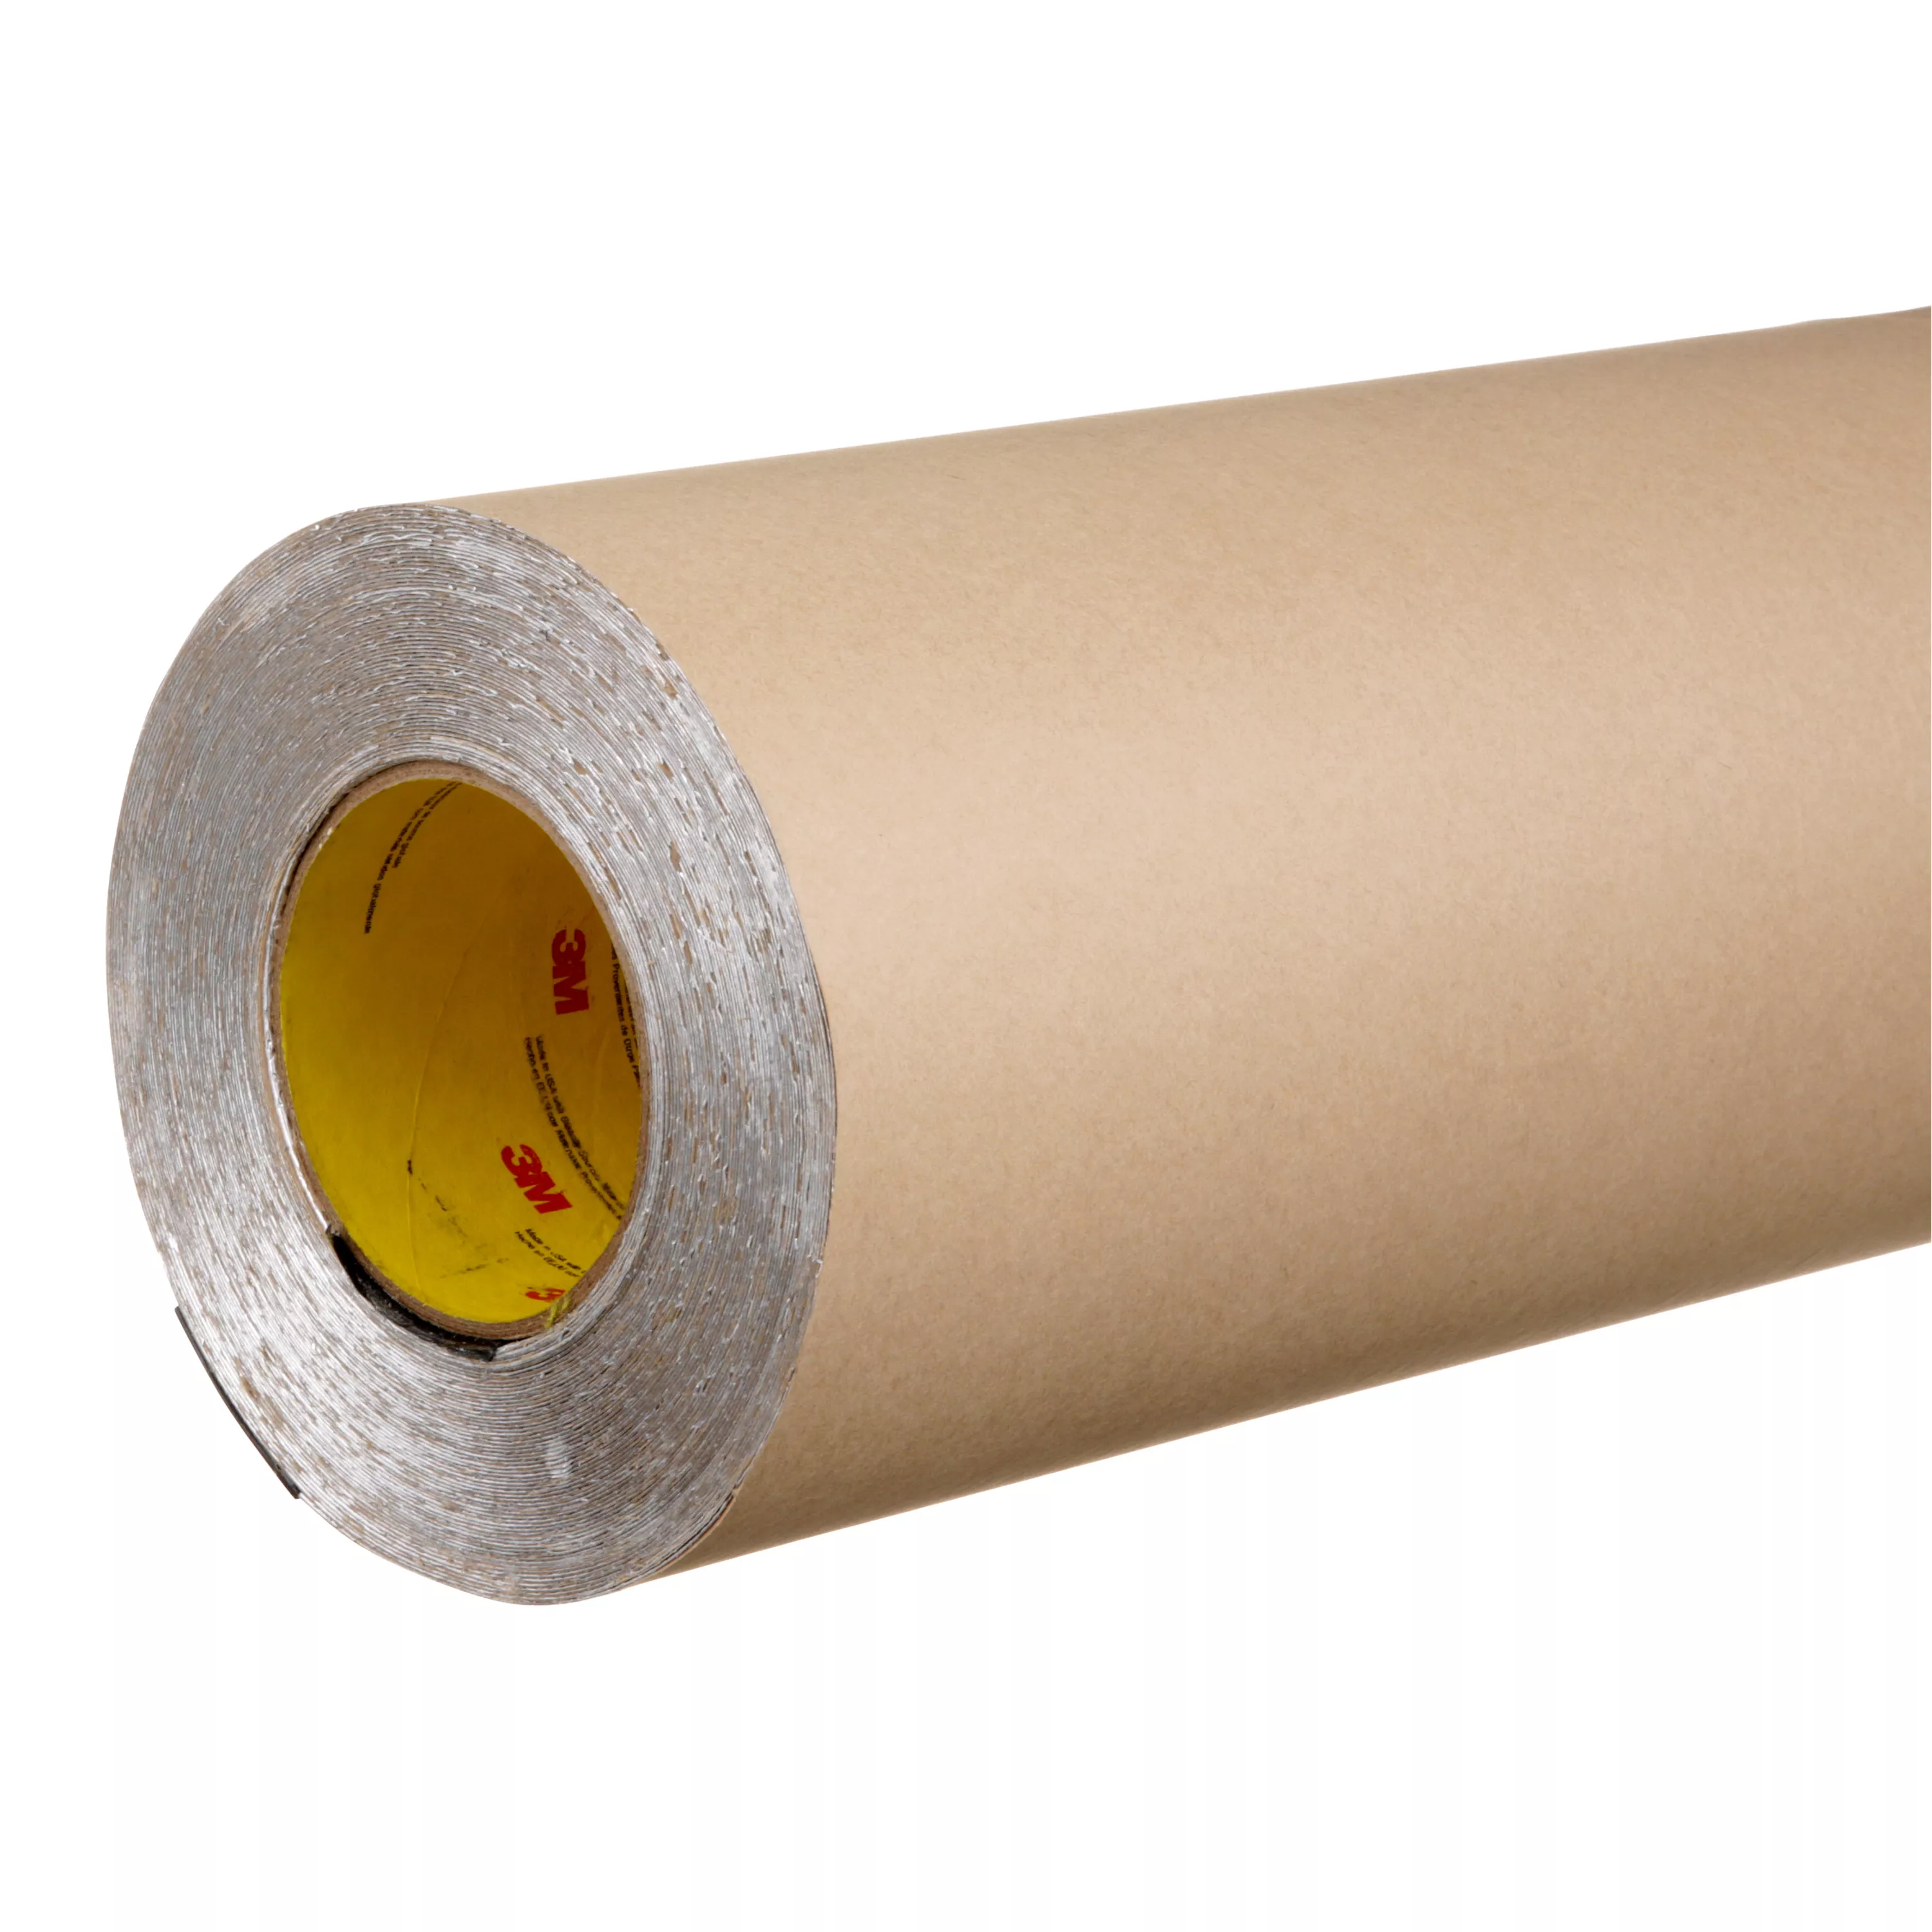 3M™ VentureClad™ Plus Insulation Jacketing Tape Embossed 1579GCW-E,
Natural, 30 in x 25 yd, 1 Roll/Case